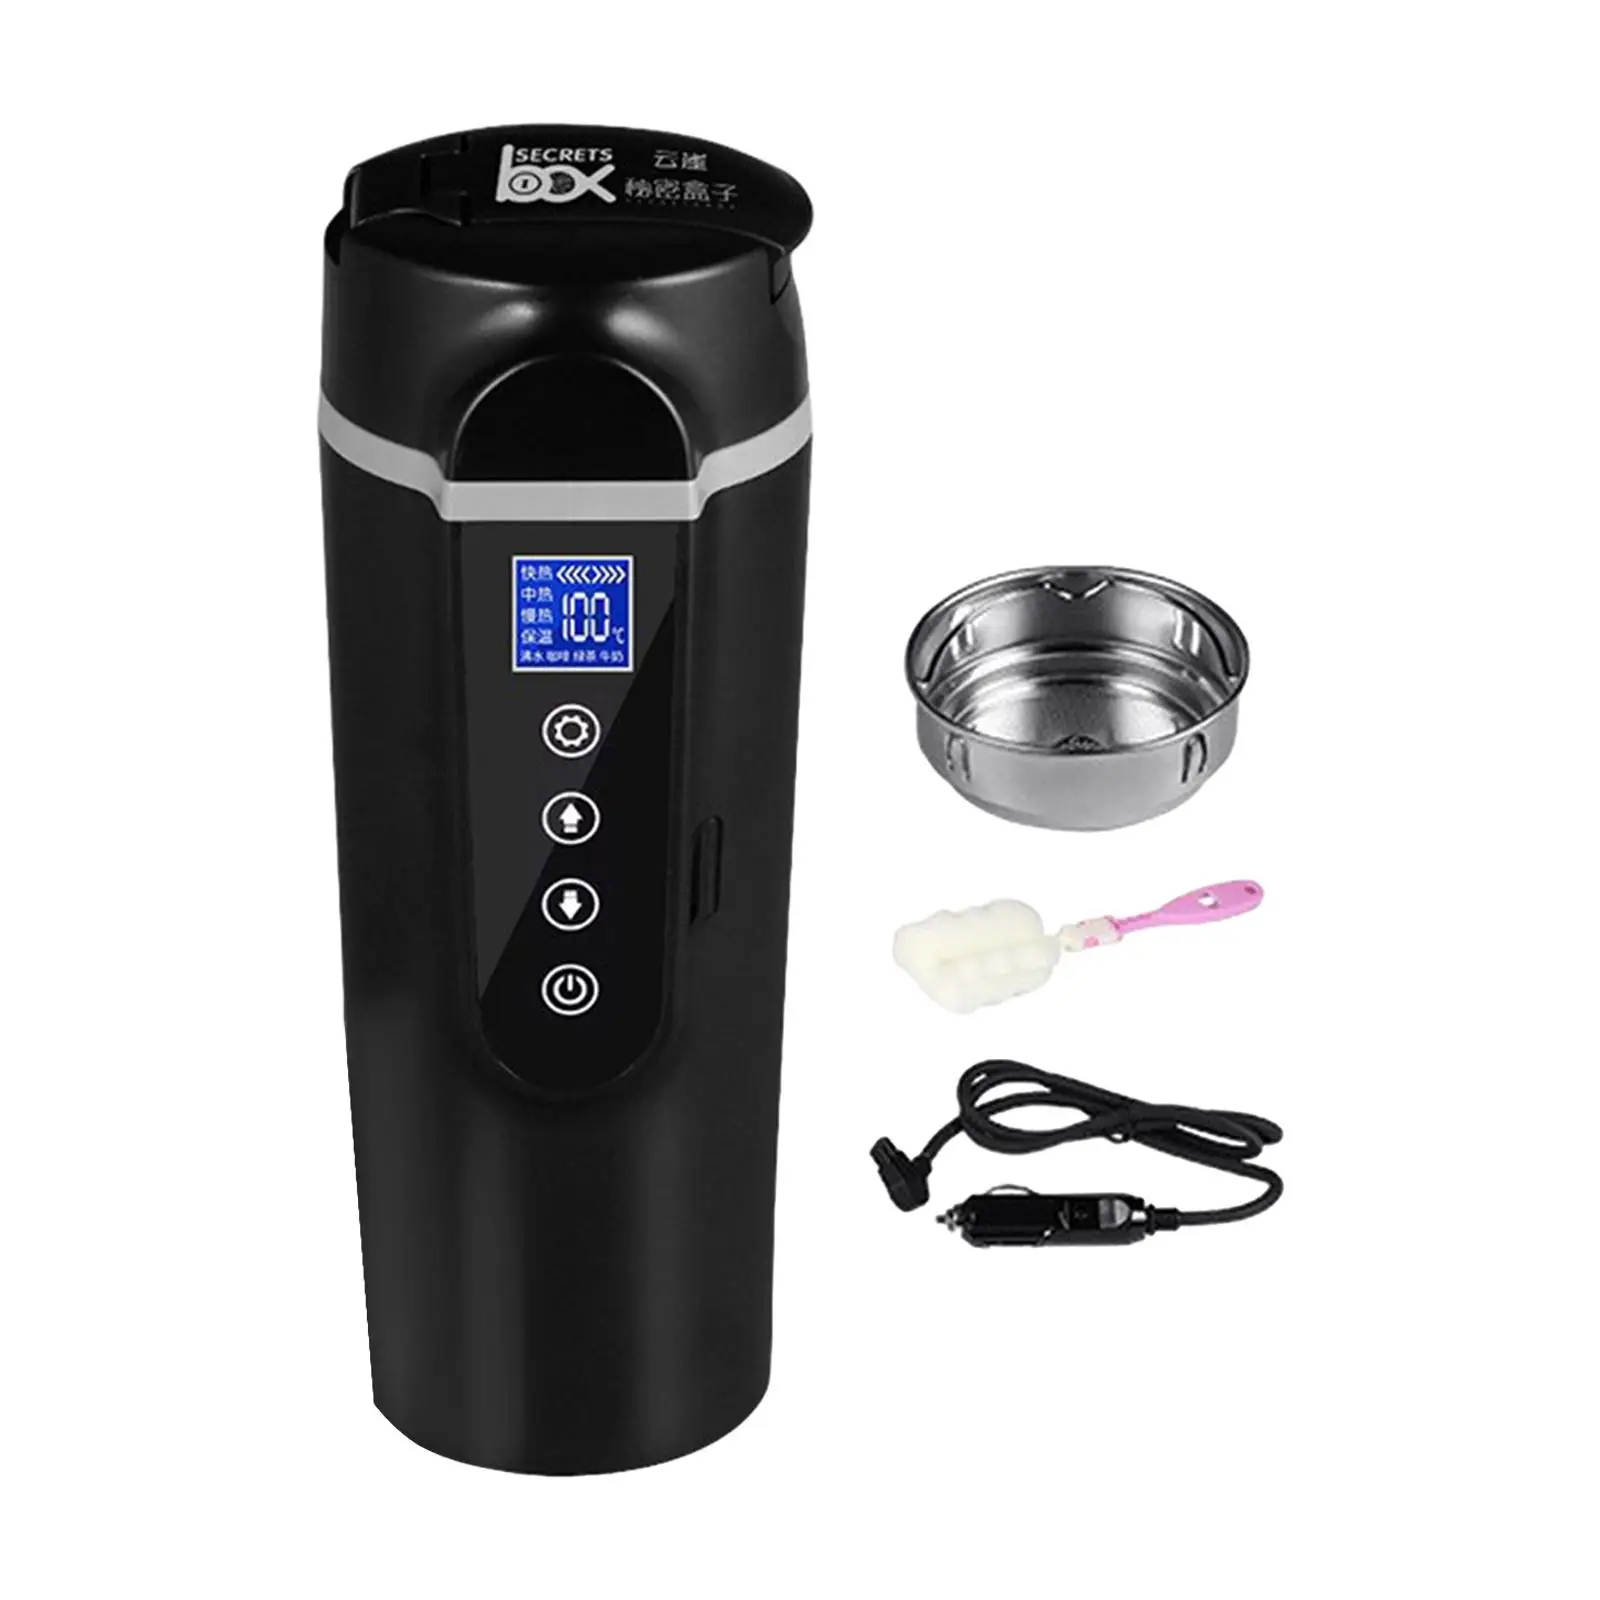 Car Heating Cup Portable Travel Coffee Mug for Auto Car Vehicles Drivers